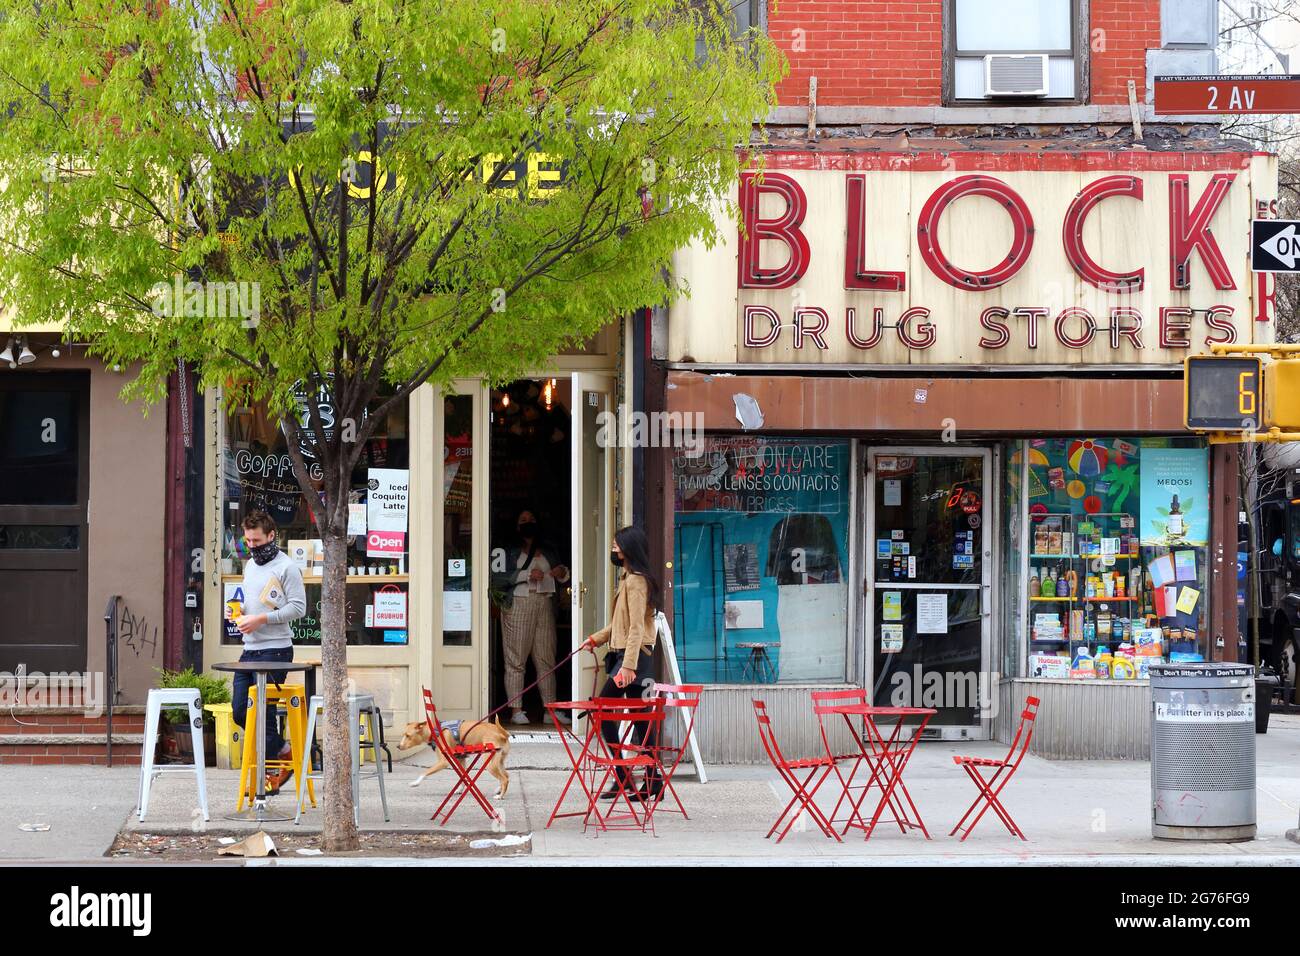 787 Coffee, Block Drug Store, 101 2nd Ave, New York, NYC storefront photo of a farm-to-cup coffee shop and a drug store in the East Village. Stock Photo